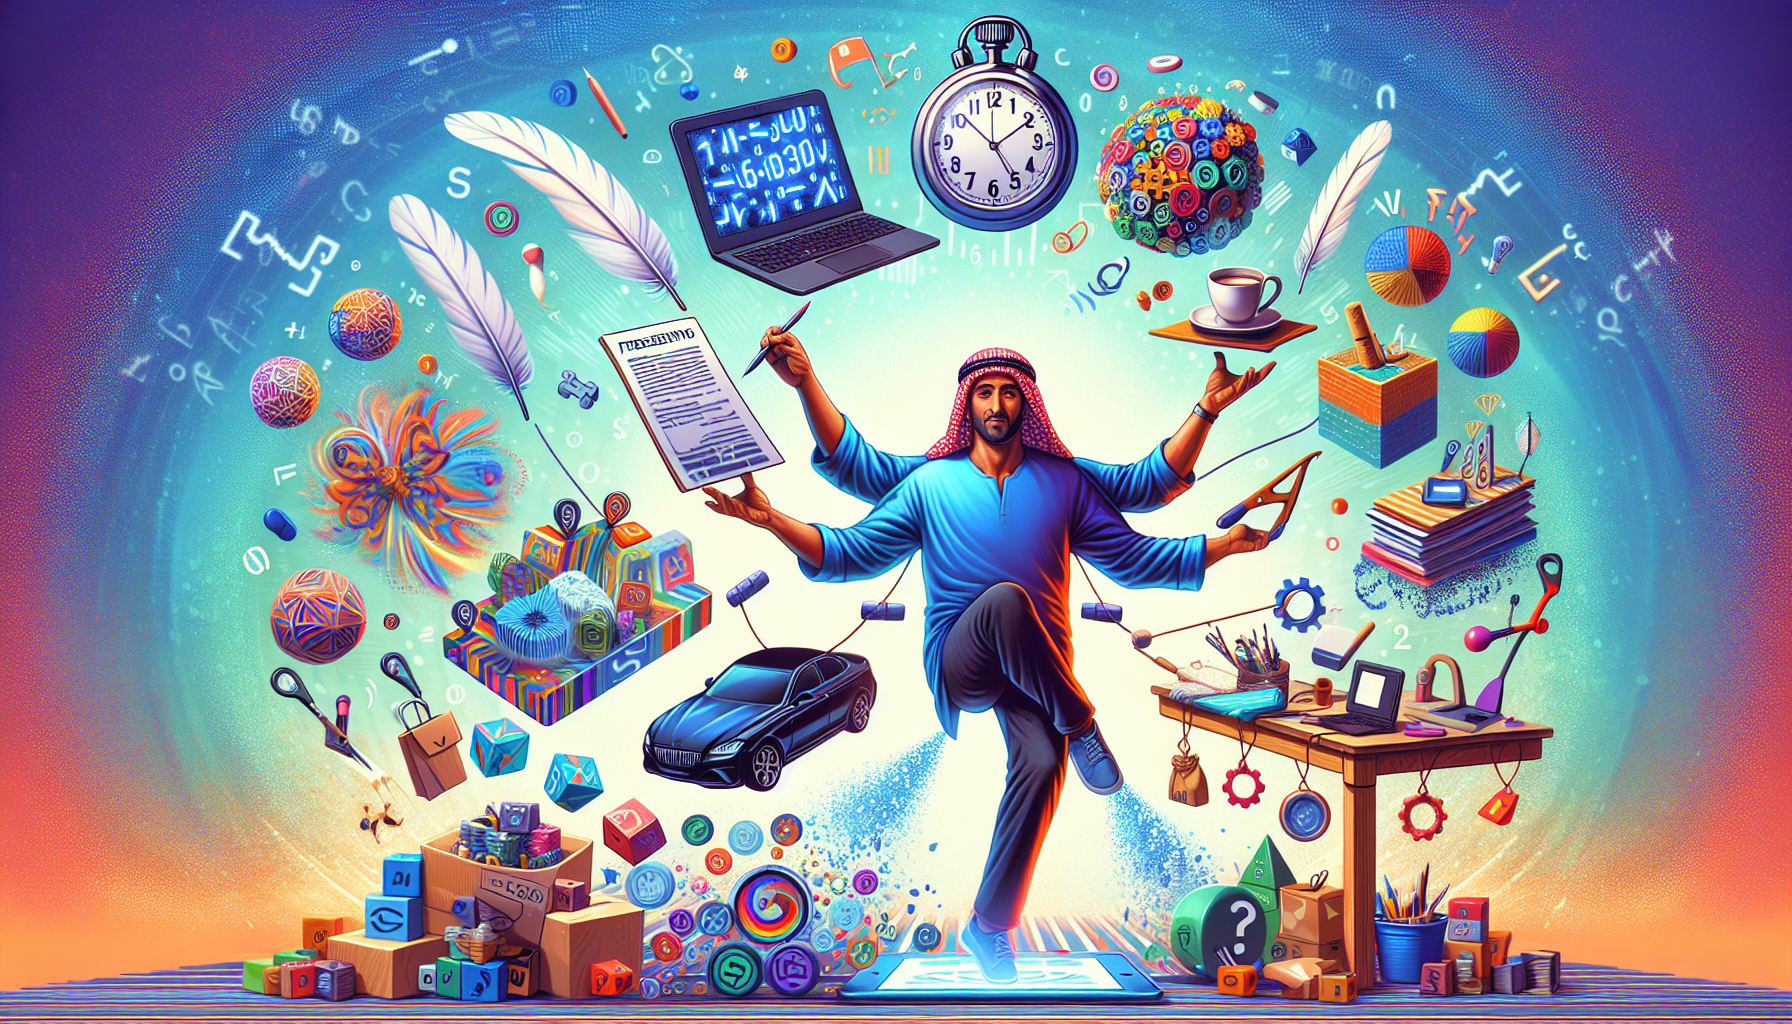 Create an image depicting a multitasking individual who is balancing five side hustle activities simultaneously, such as freelance writing, ridesharing, online tutoring, selling handmade crafts, and doing gig economy tasks. Each activity is represented with symbols or mini-scenes around the person. Ensure the overall tone is dynamic and energetic, with elements of modern technology and a sense of urgency.